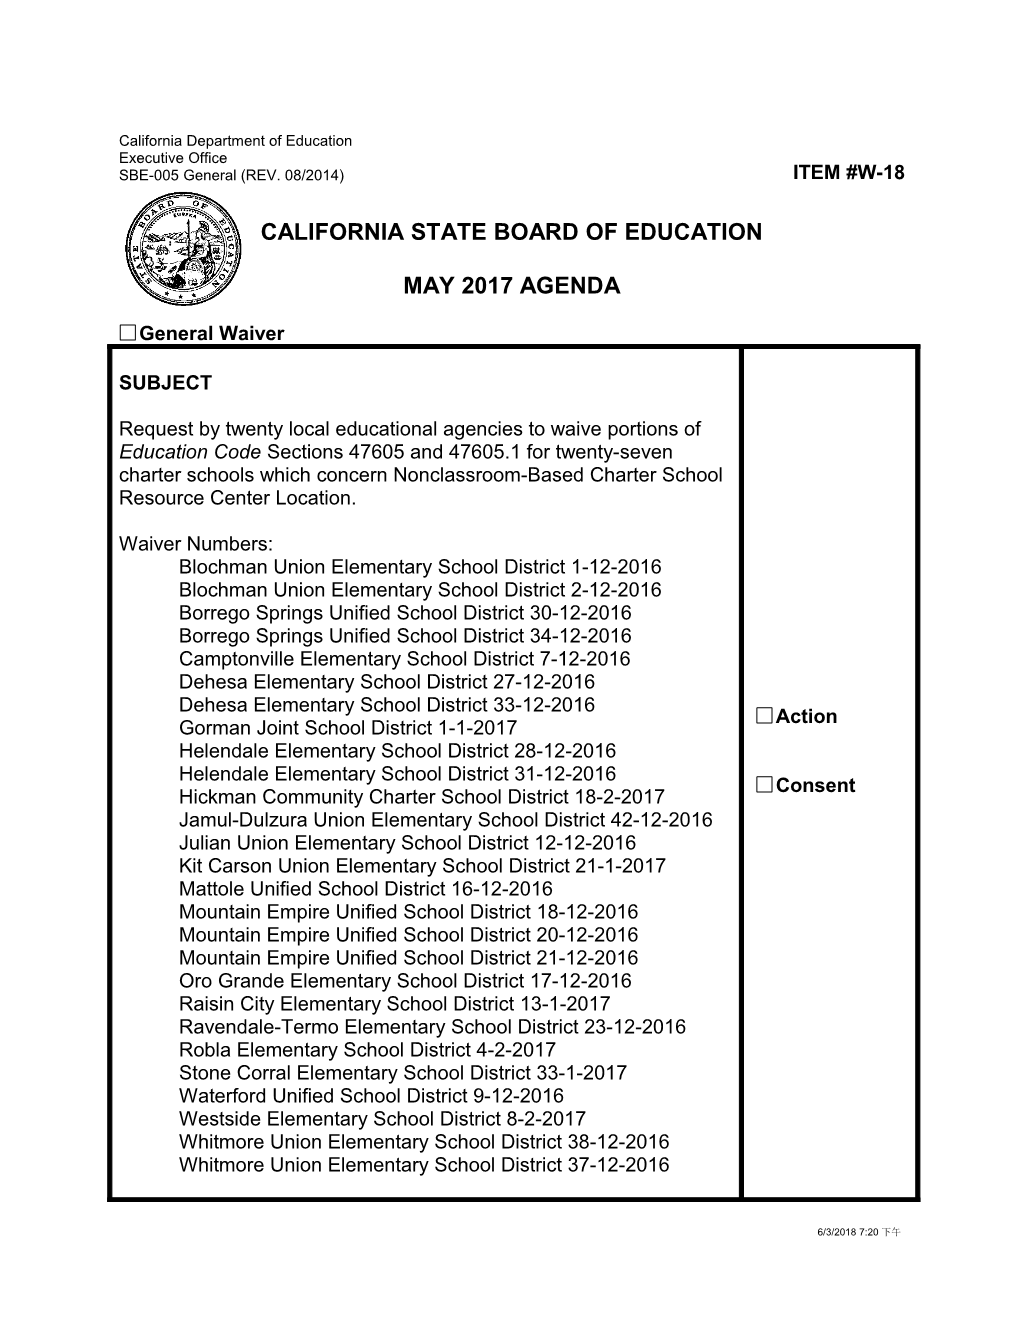 May 2017 Agenda Item W-18 - Meeting Agendas (CA State Board of Education)